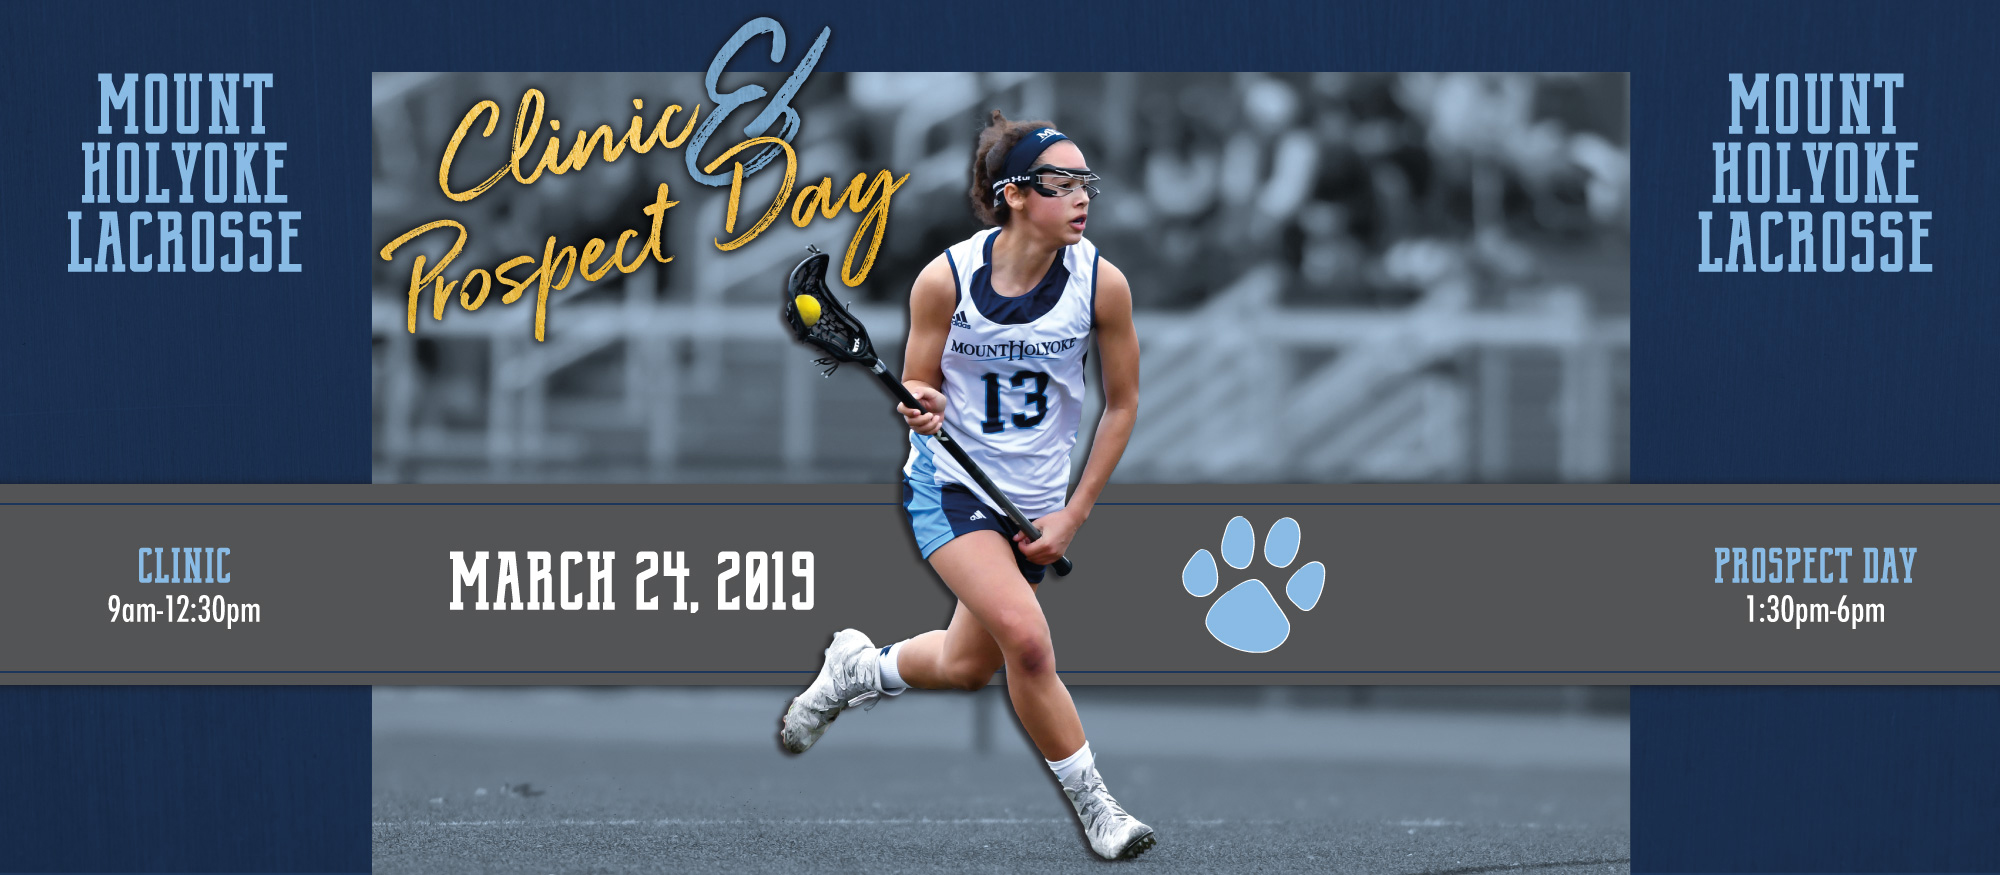 Image promoting the MHC Lacrosse Clinic & Prospect Day on Sunday, March 24, 2019.